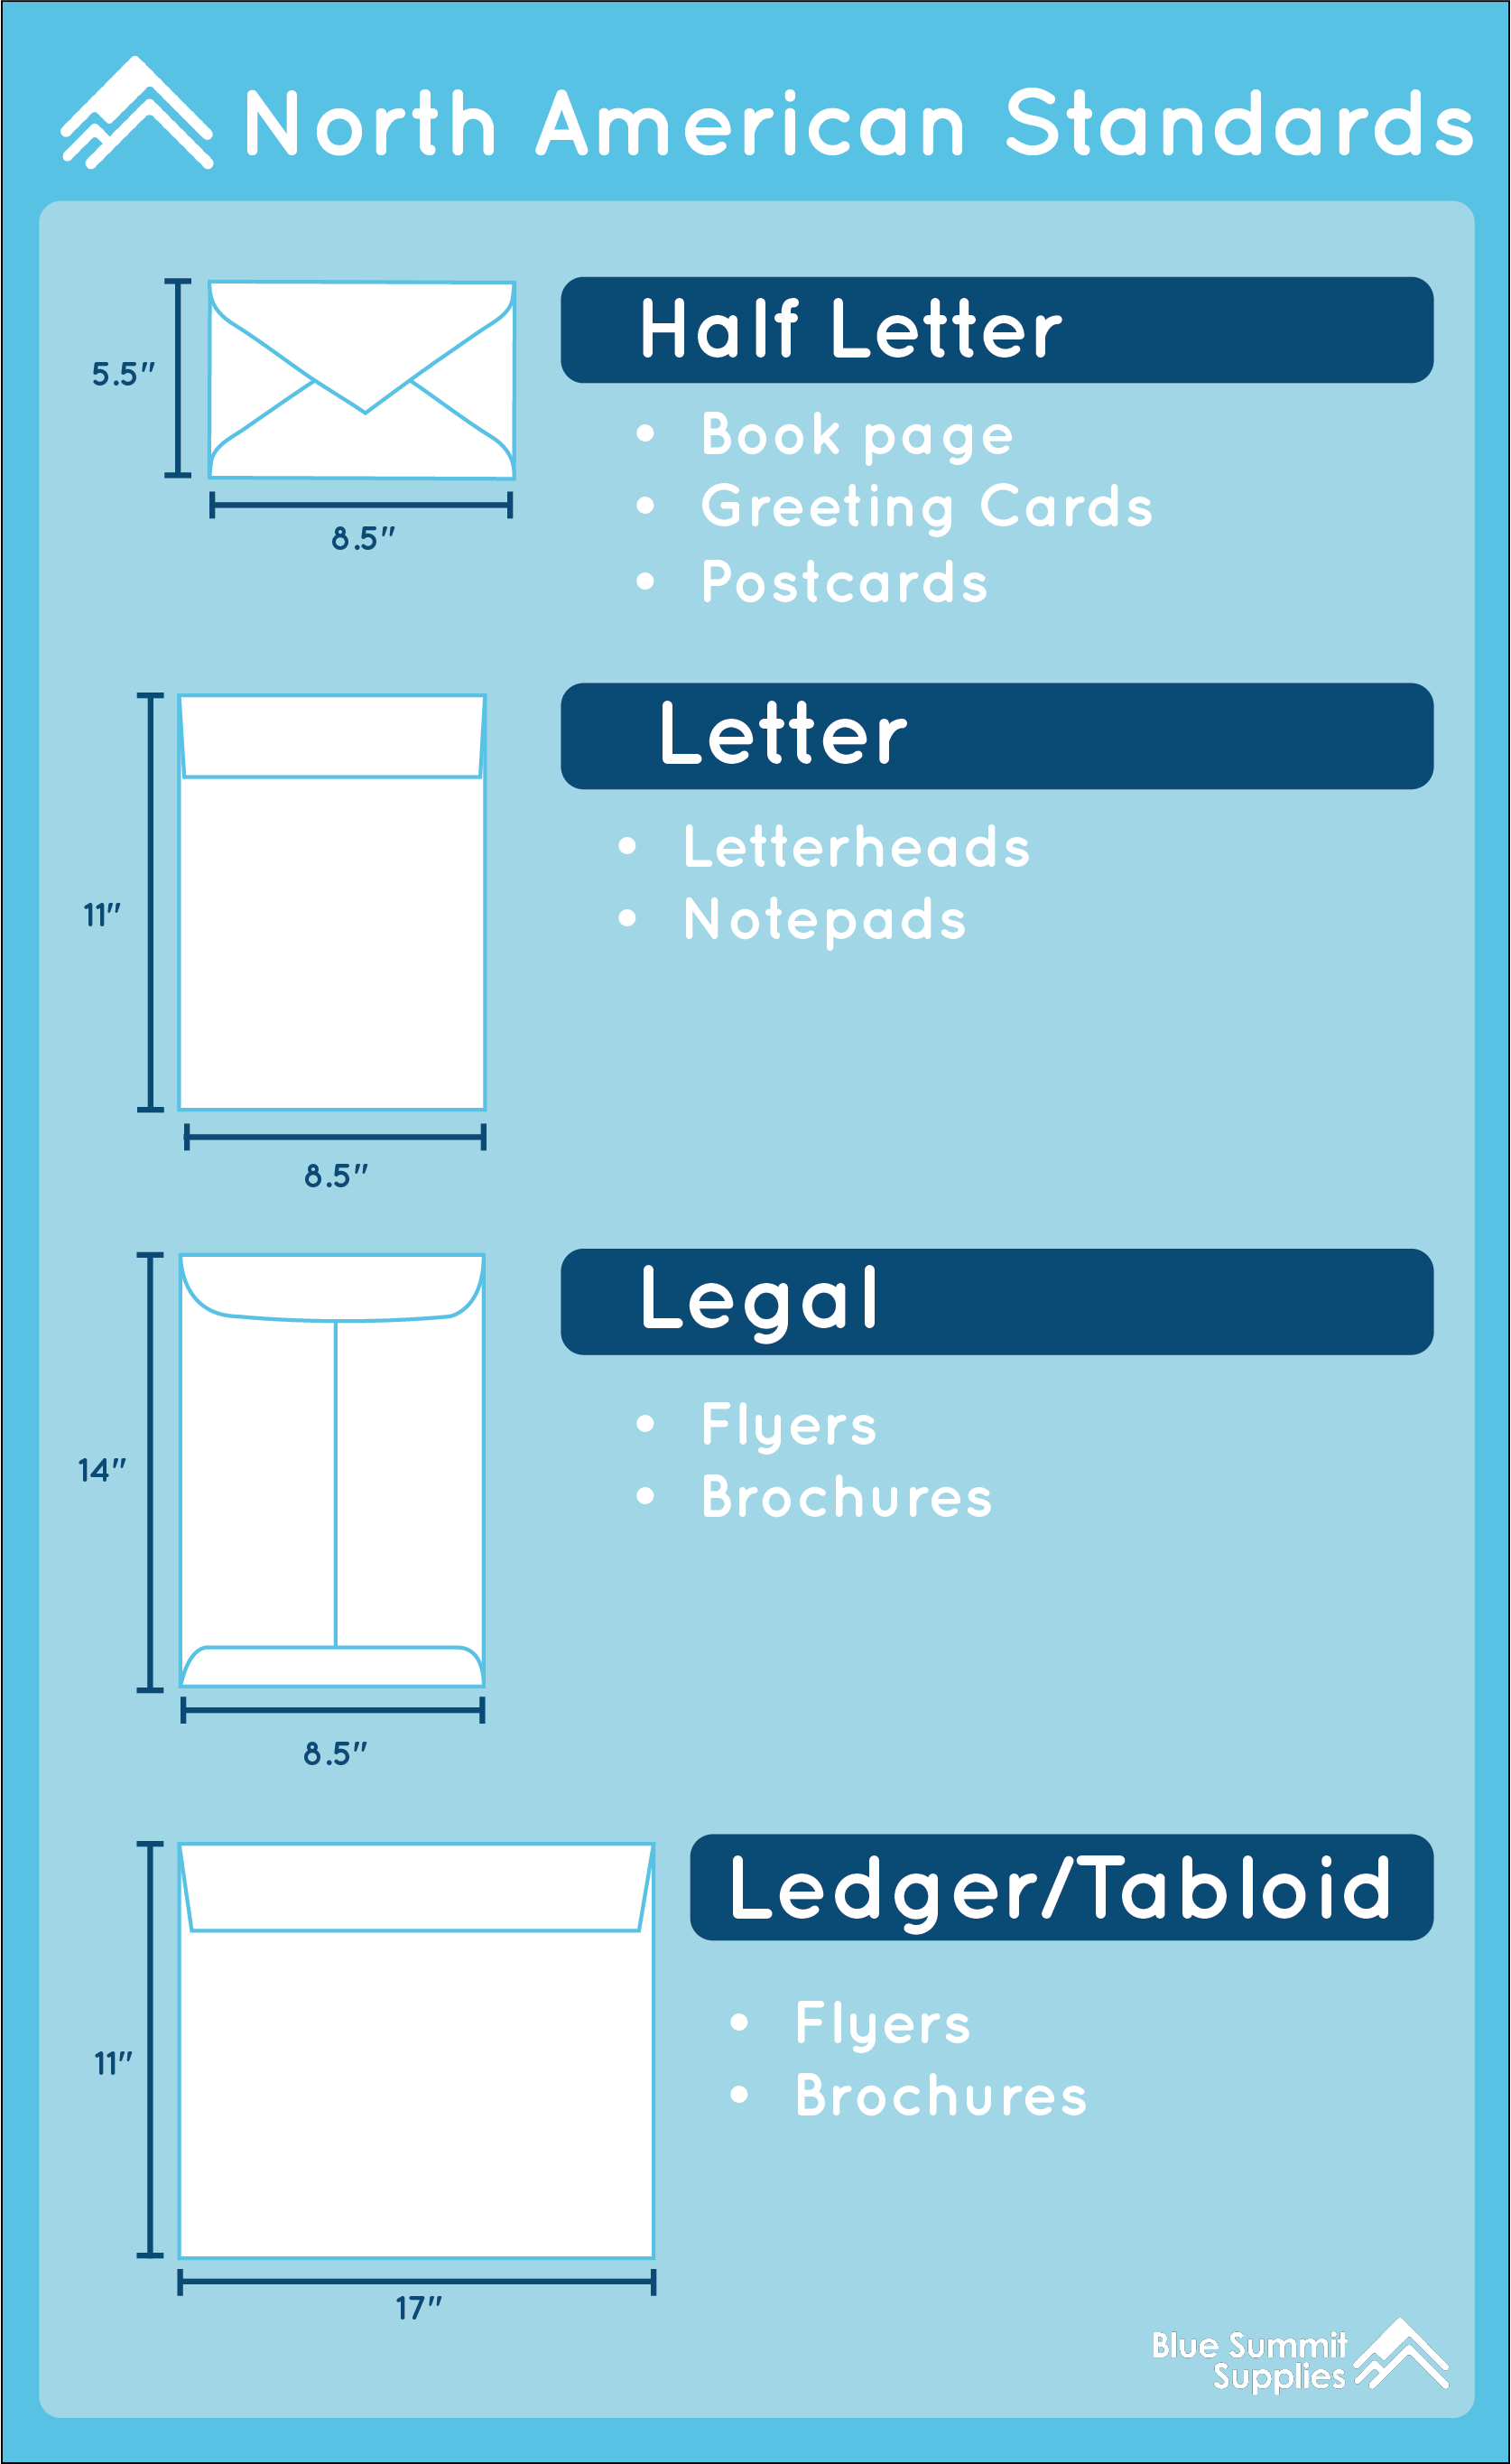 Exploring C4: Envelope Size and Style Guide